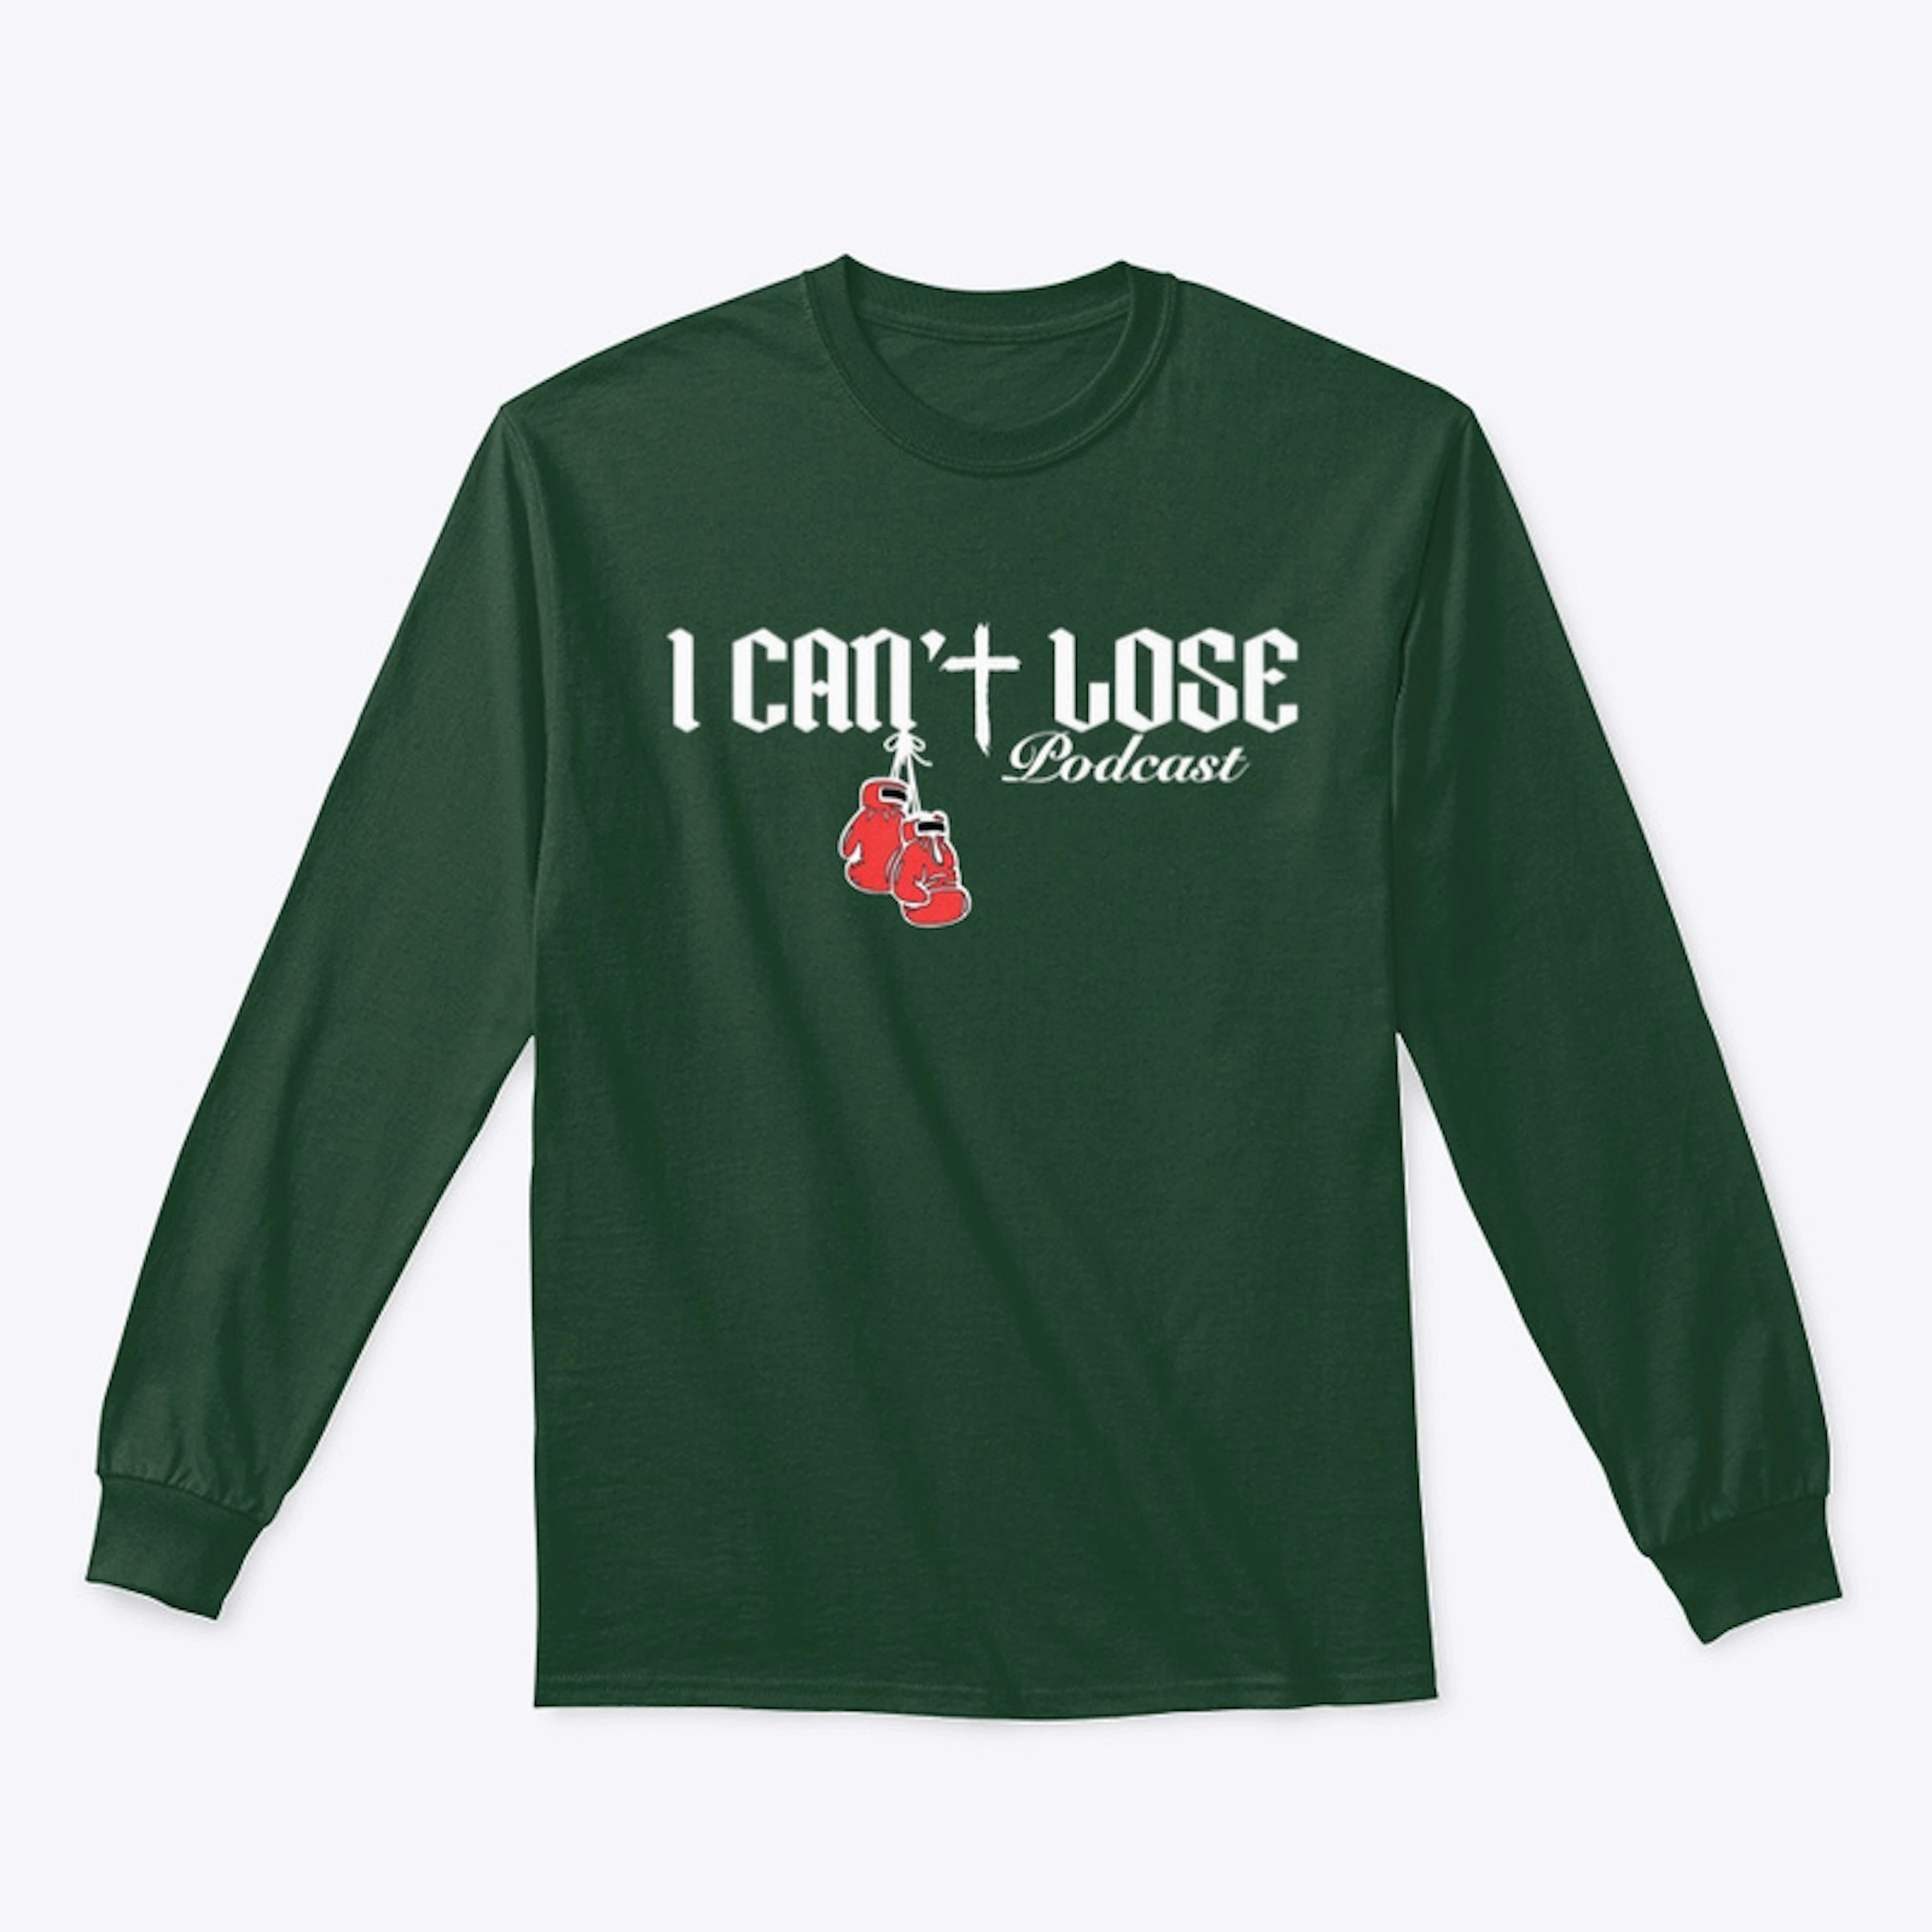 I can’t lose podcast